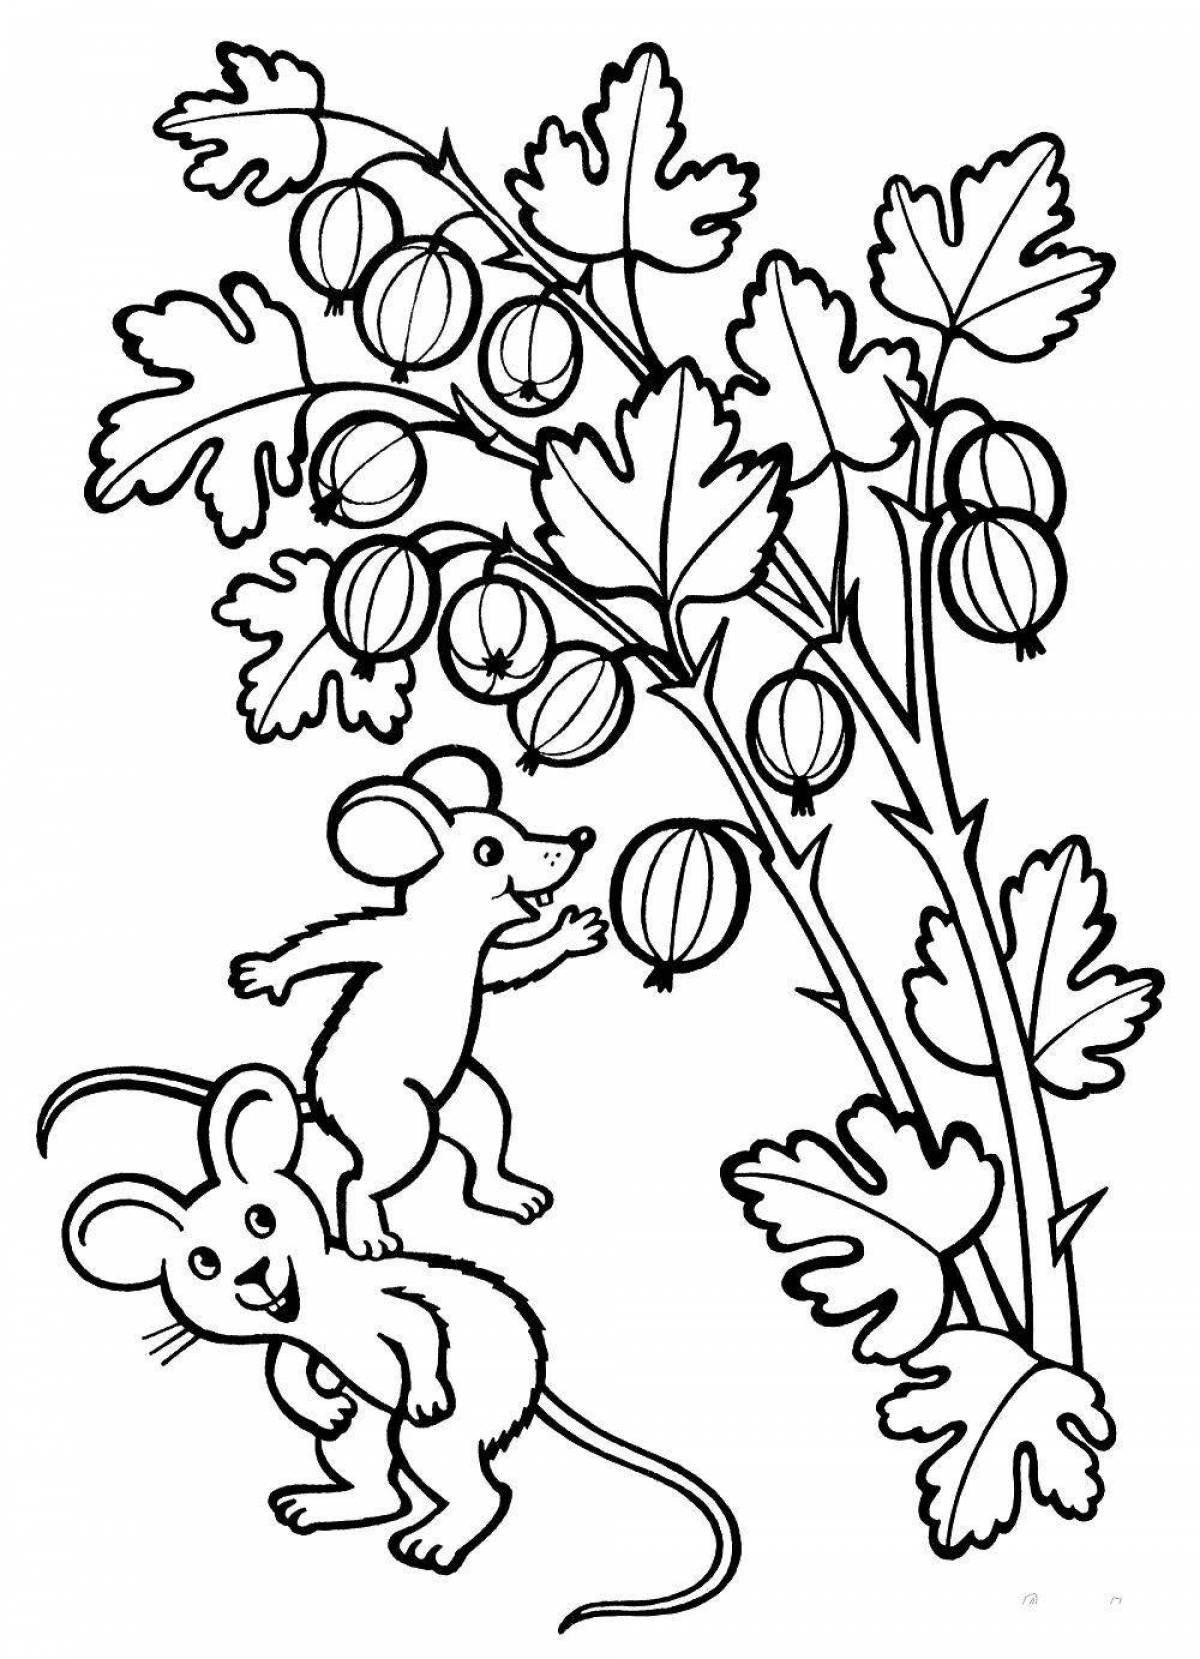 Exciting currant coloring page for kids